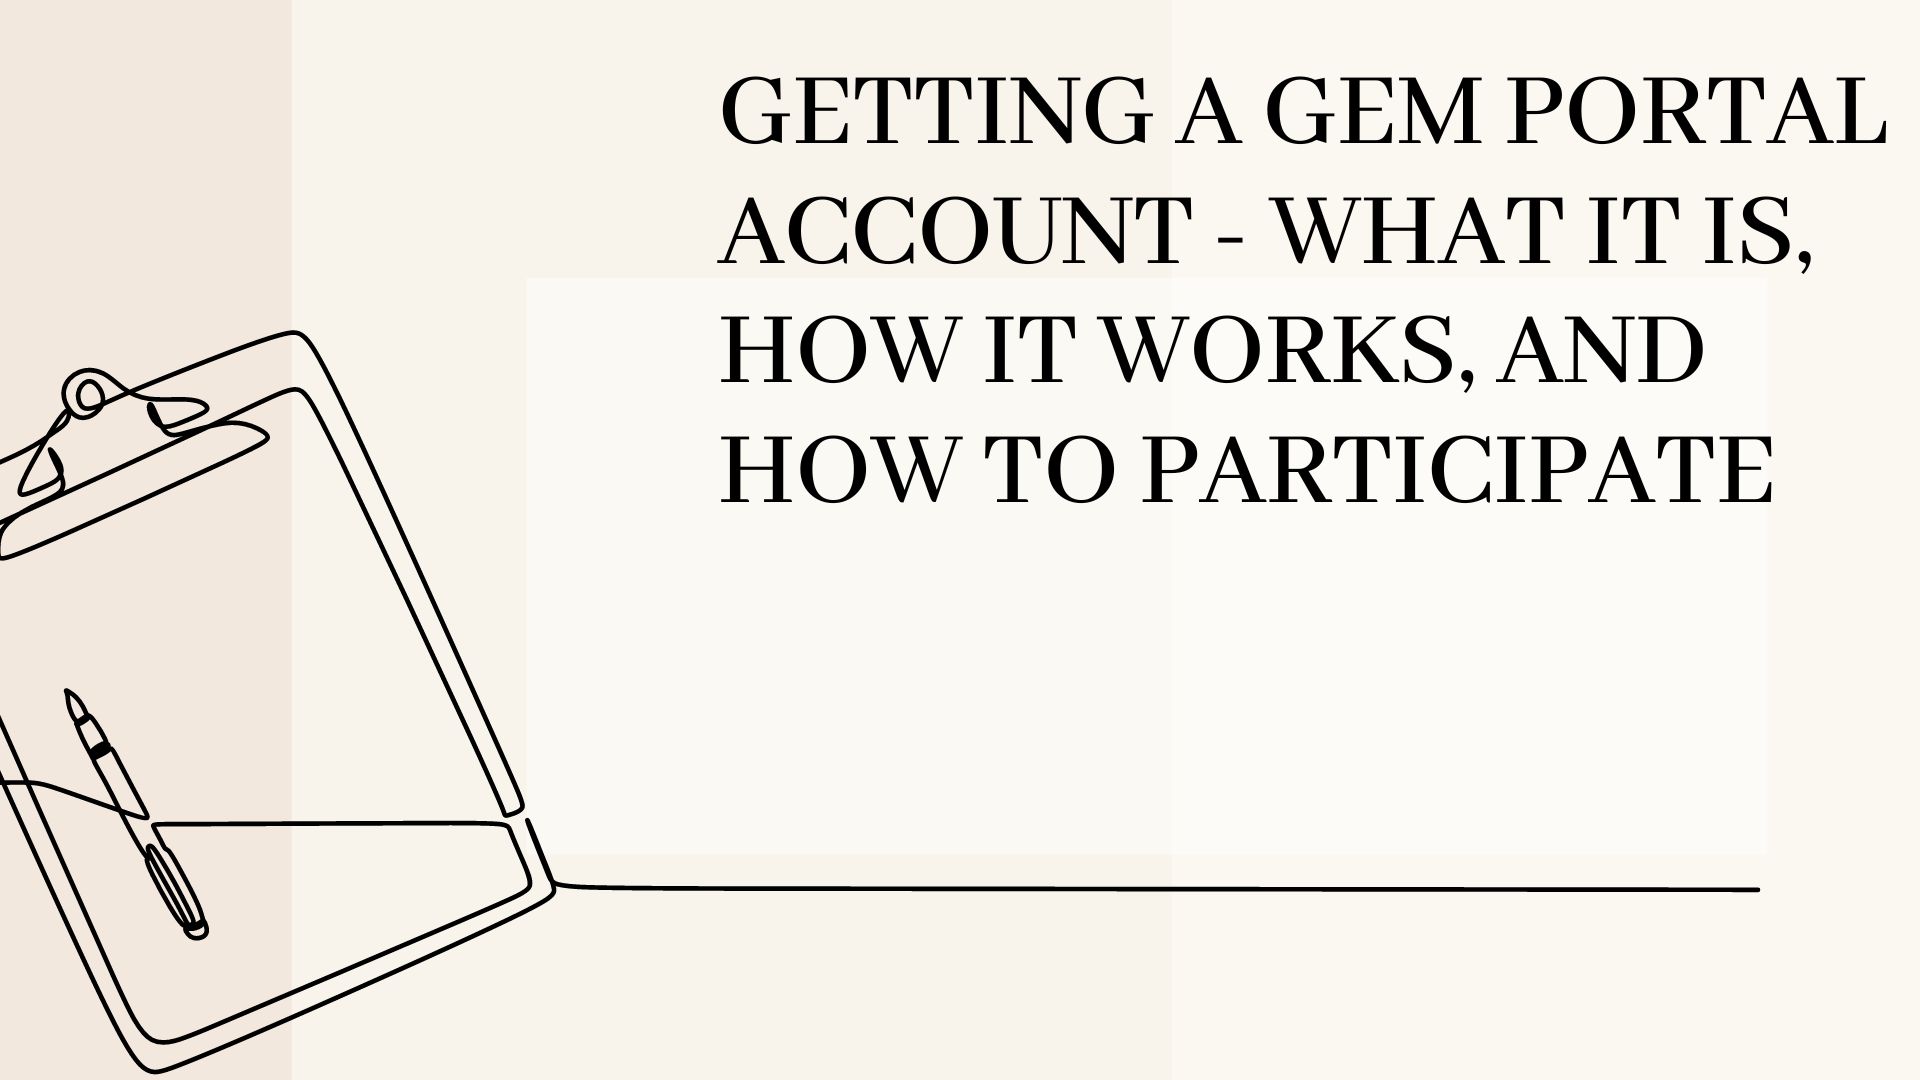 Getting a GeM Portal account - What it is, how it works, and how to participate (1)